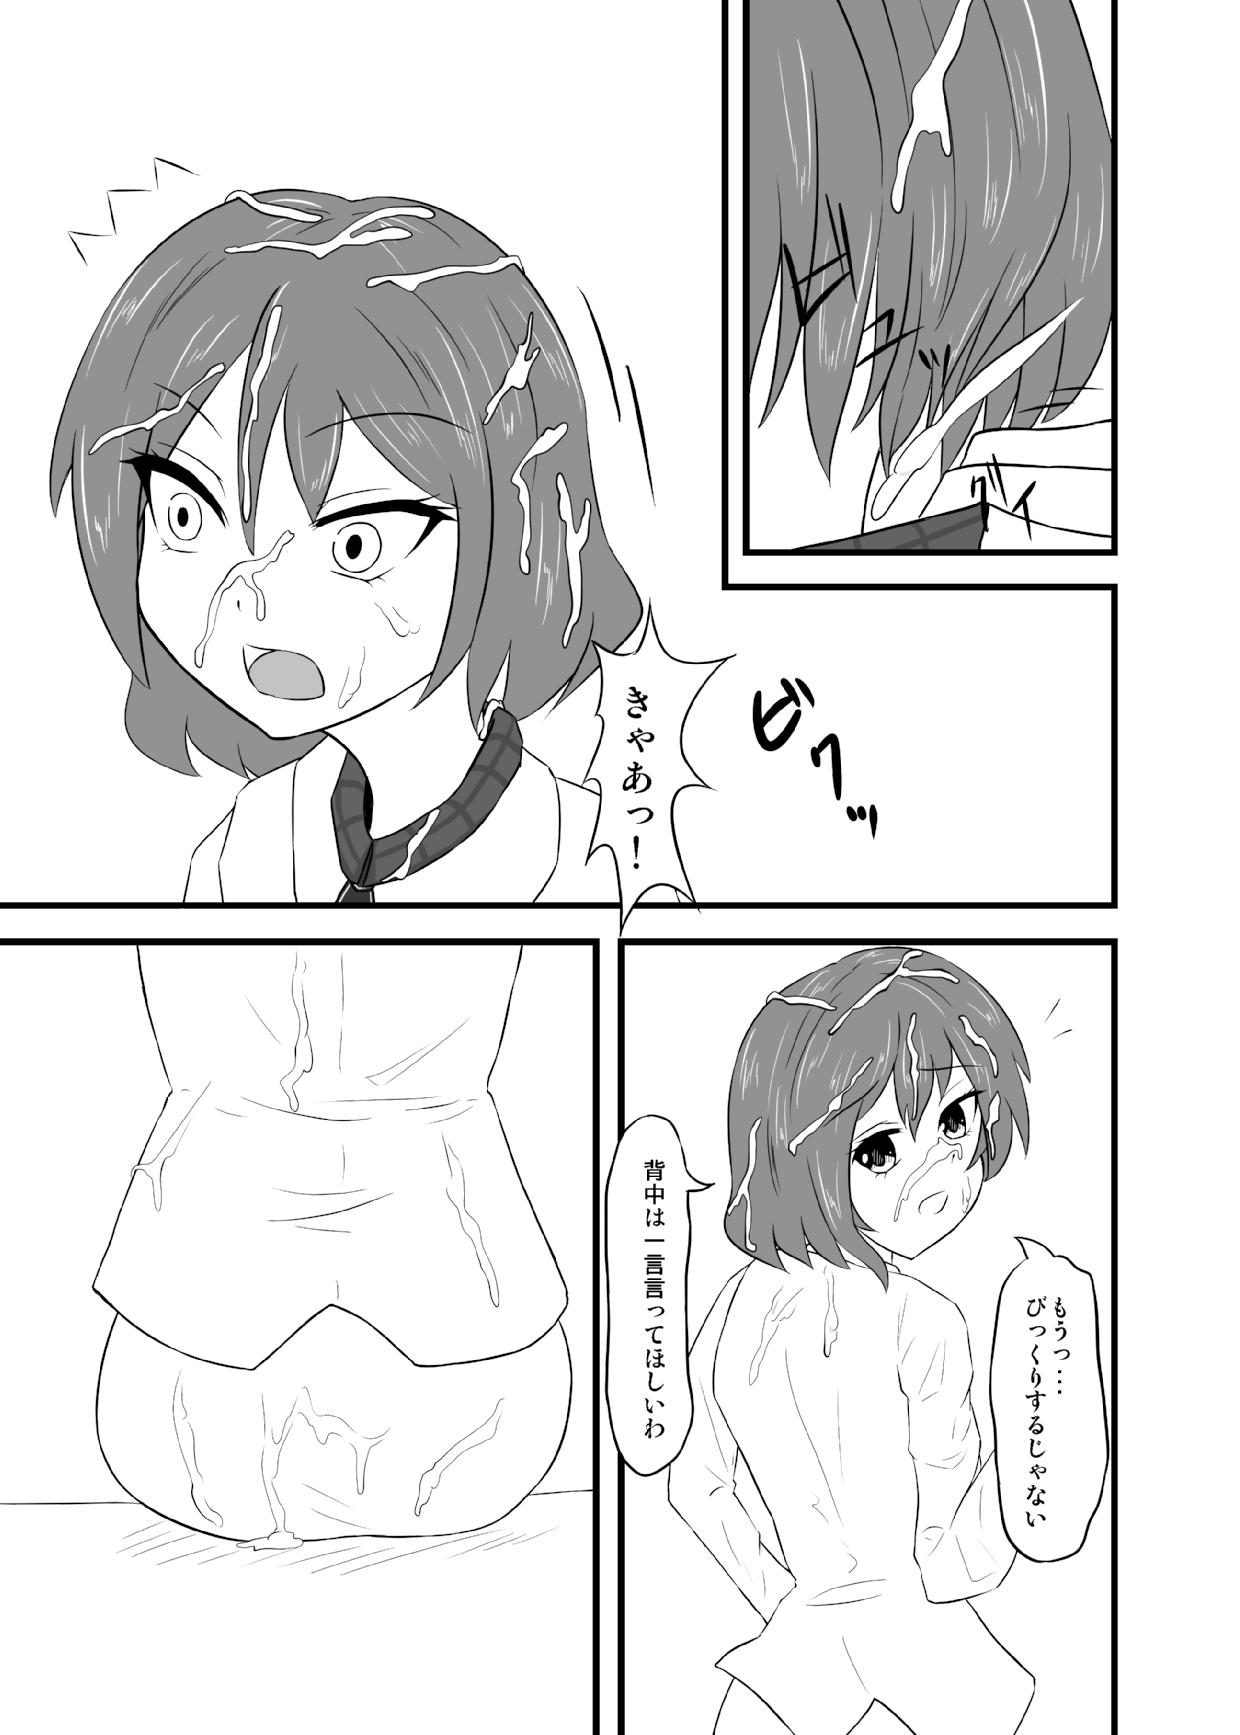 Exhibitionist ぶっかけらいこ - Touhou project Real Amature Porn - Page 10